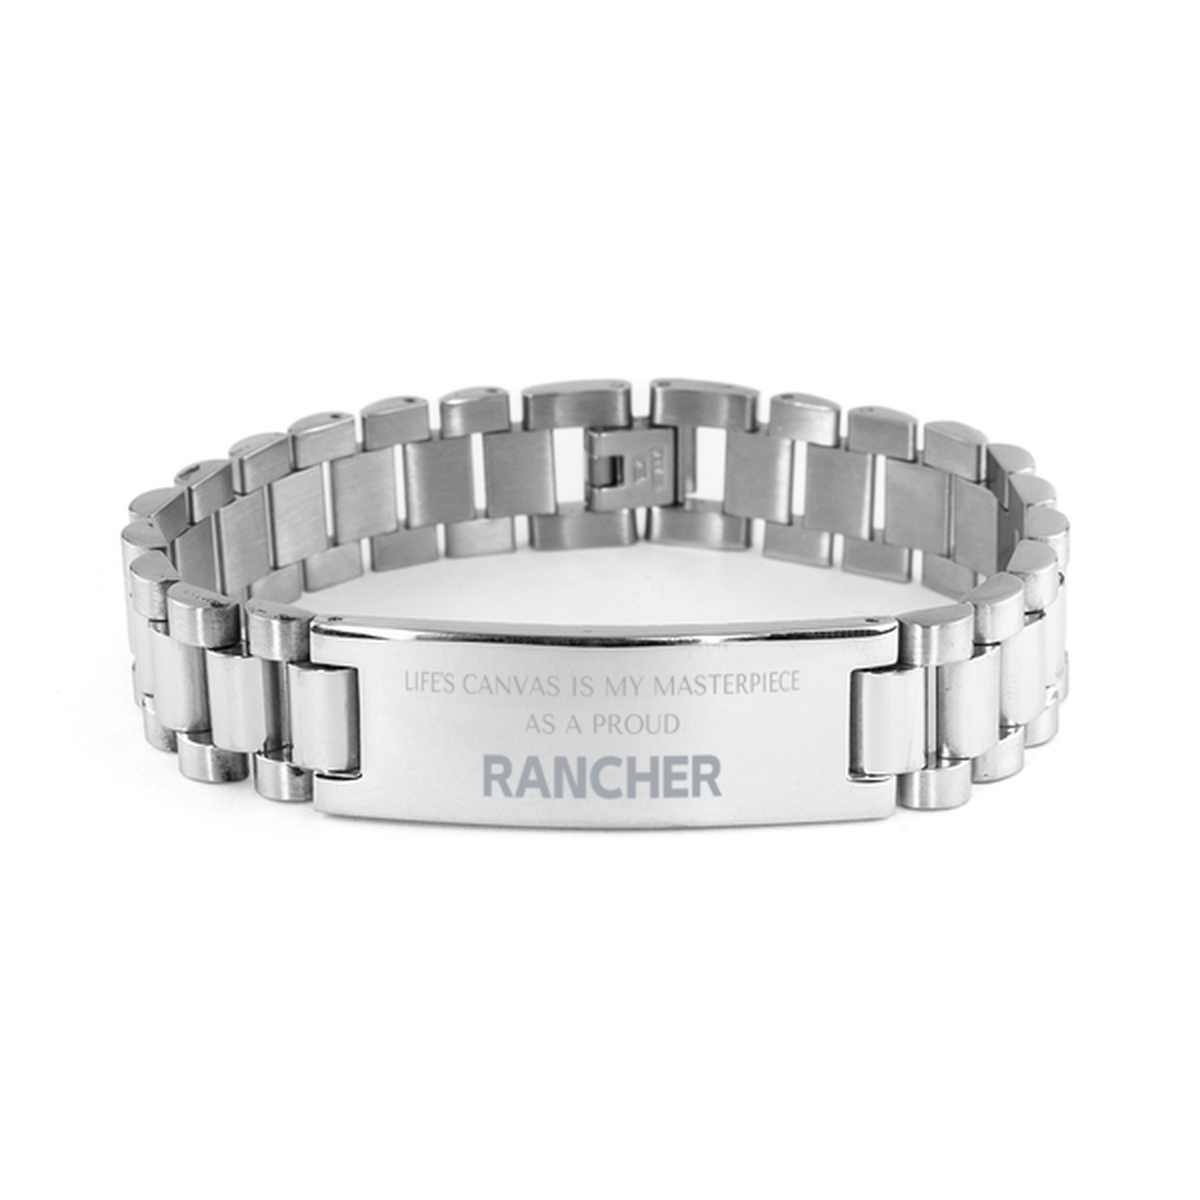 Proud Rancher Gifts, Life's canvas is my masterpiece, Epic Birthday Christmas Unique Ladder Stainless Steel Bracelet For Rancher, Coworkers, Men, Women, Friends